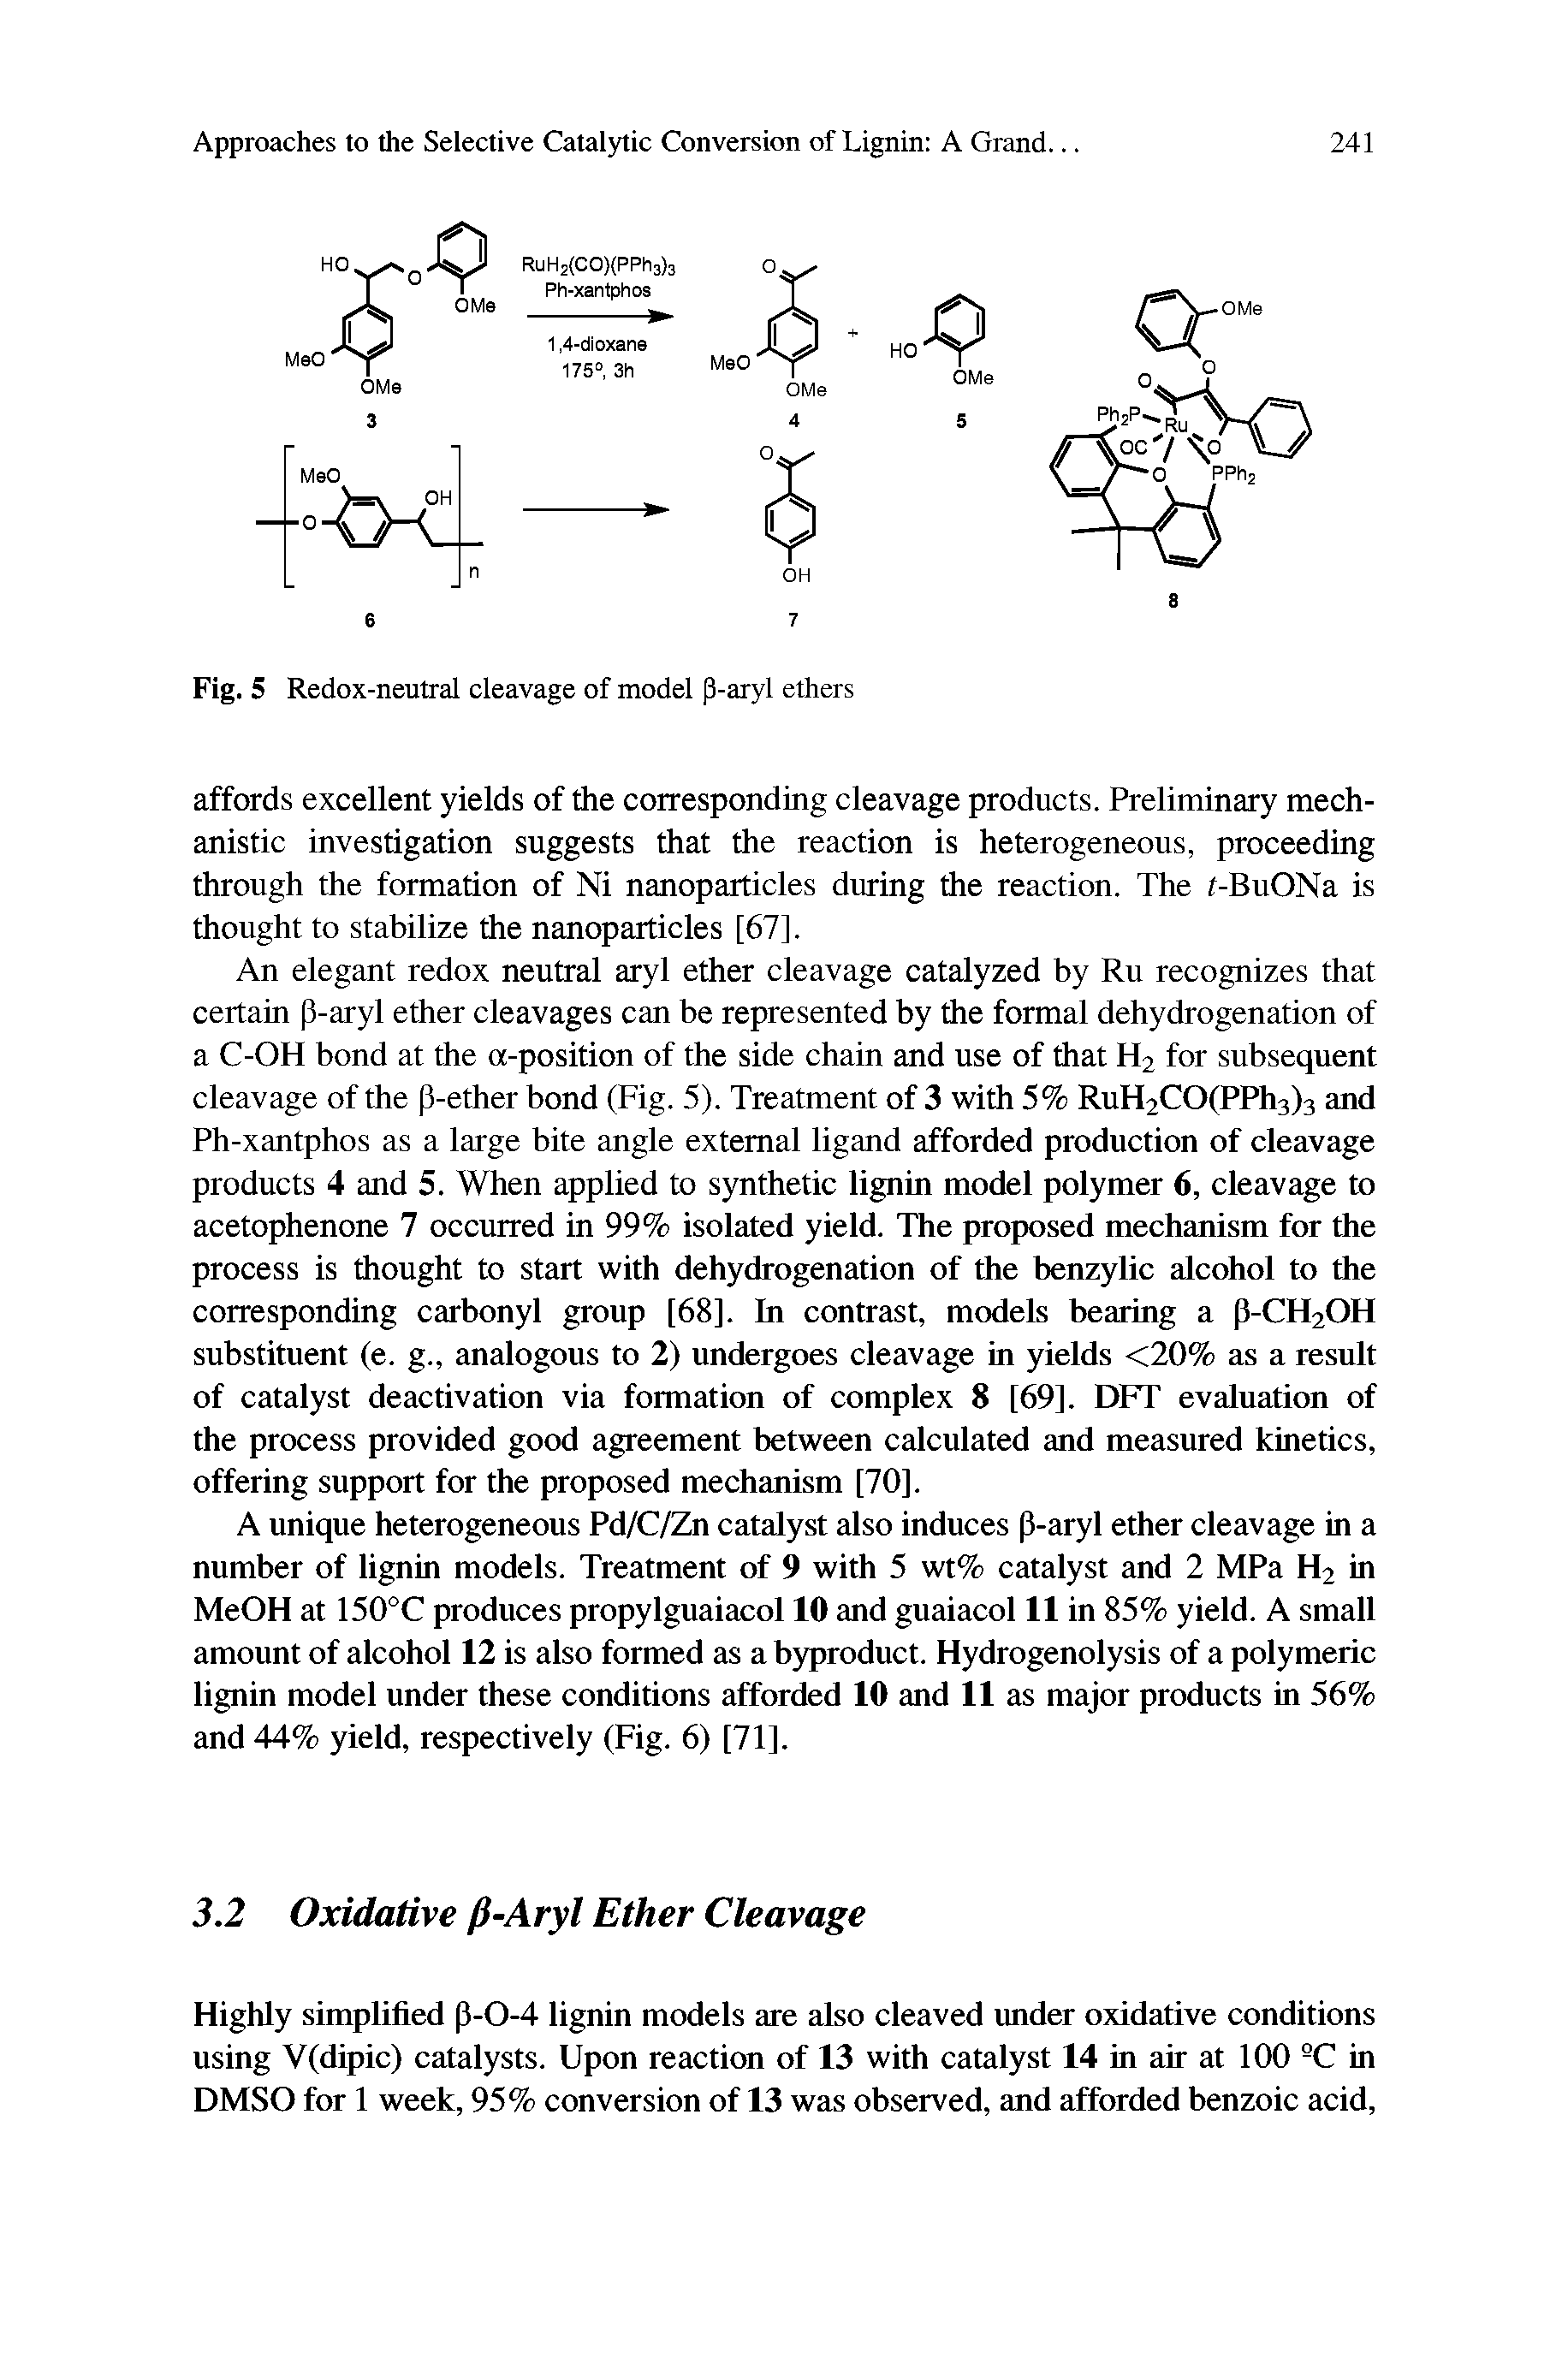 Fig. 5 Redox-neutral cleavage of model p-aryl ethers...